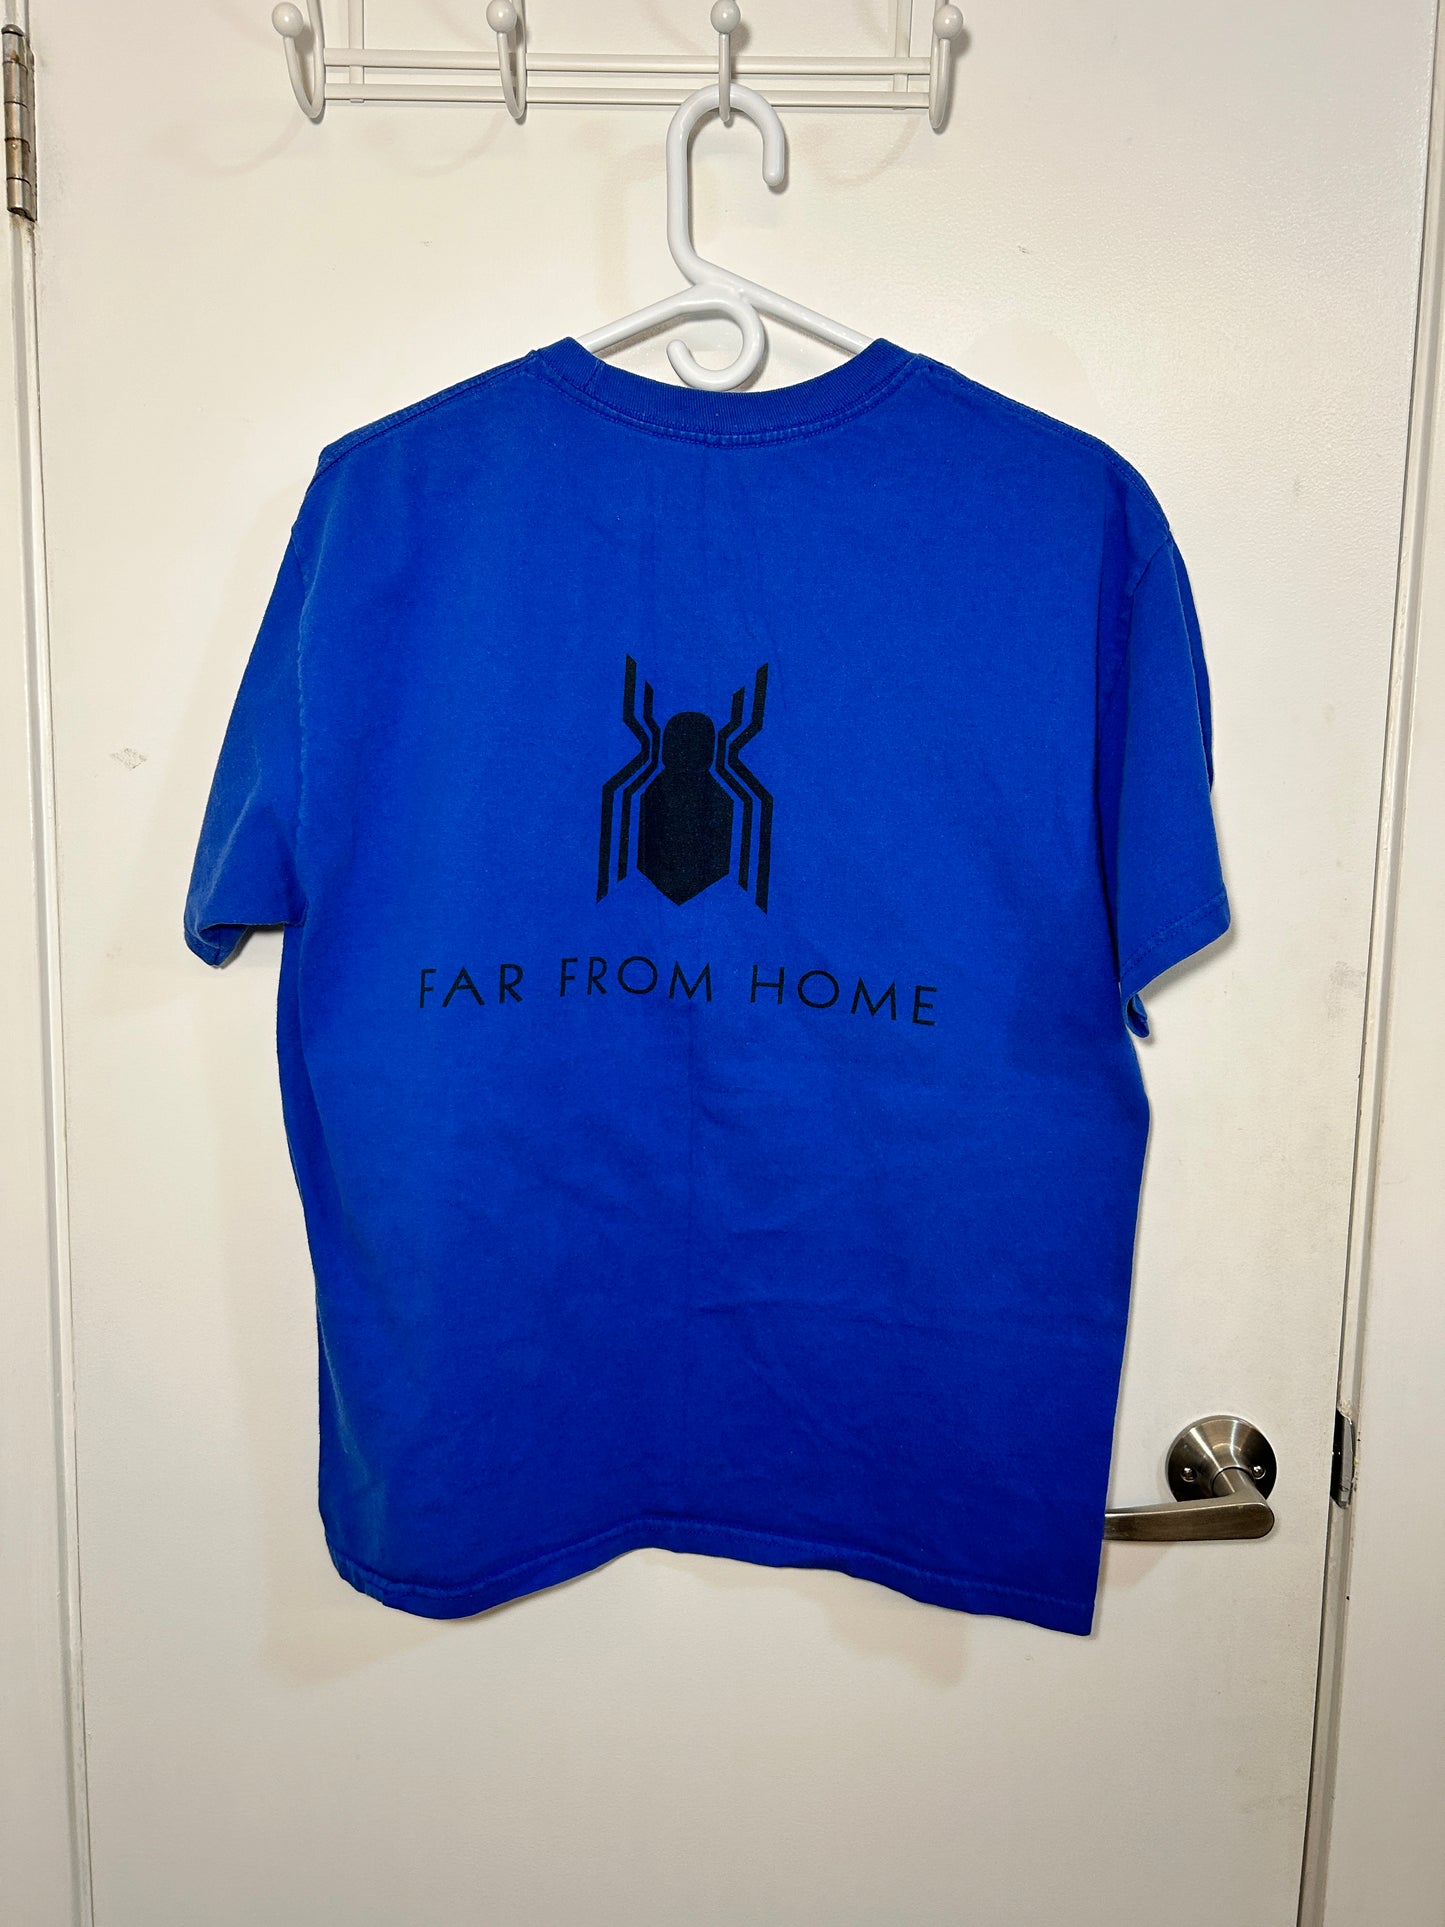 Spider-Man Far from Home Graphic Tee (L)